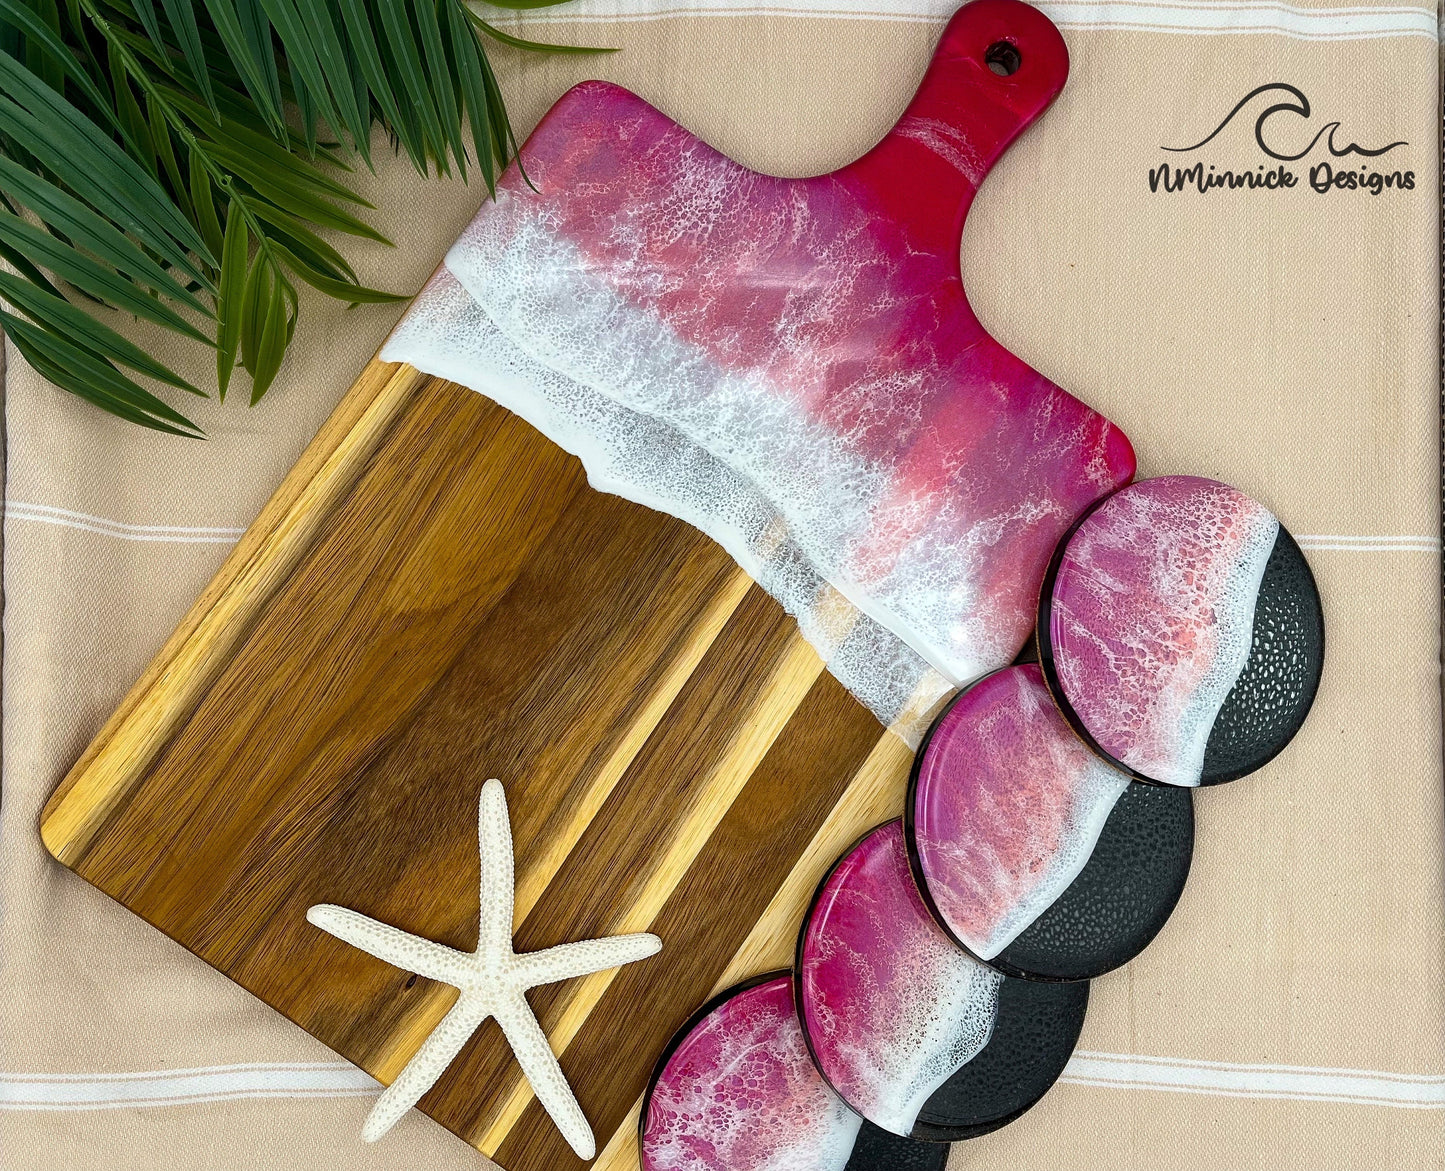 Acacia Wood Serving Board with handle.  Top portion covered in red and pink ocean resin art resembling waves of the ocean.  Matching set of 4 ocean resin drink coasters with real black sand and epoxy resin ocean and cork backings.  Laying on a tan beach towel with a natural starfish (not included).